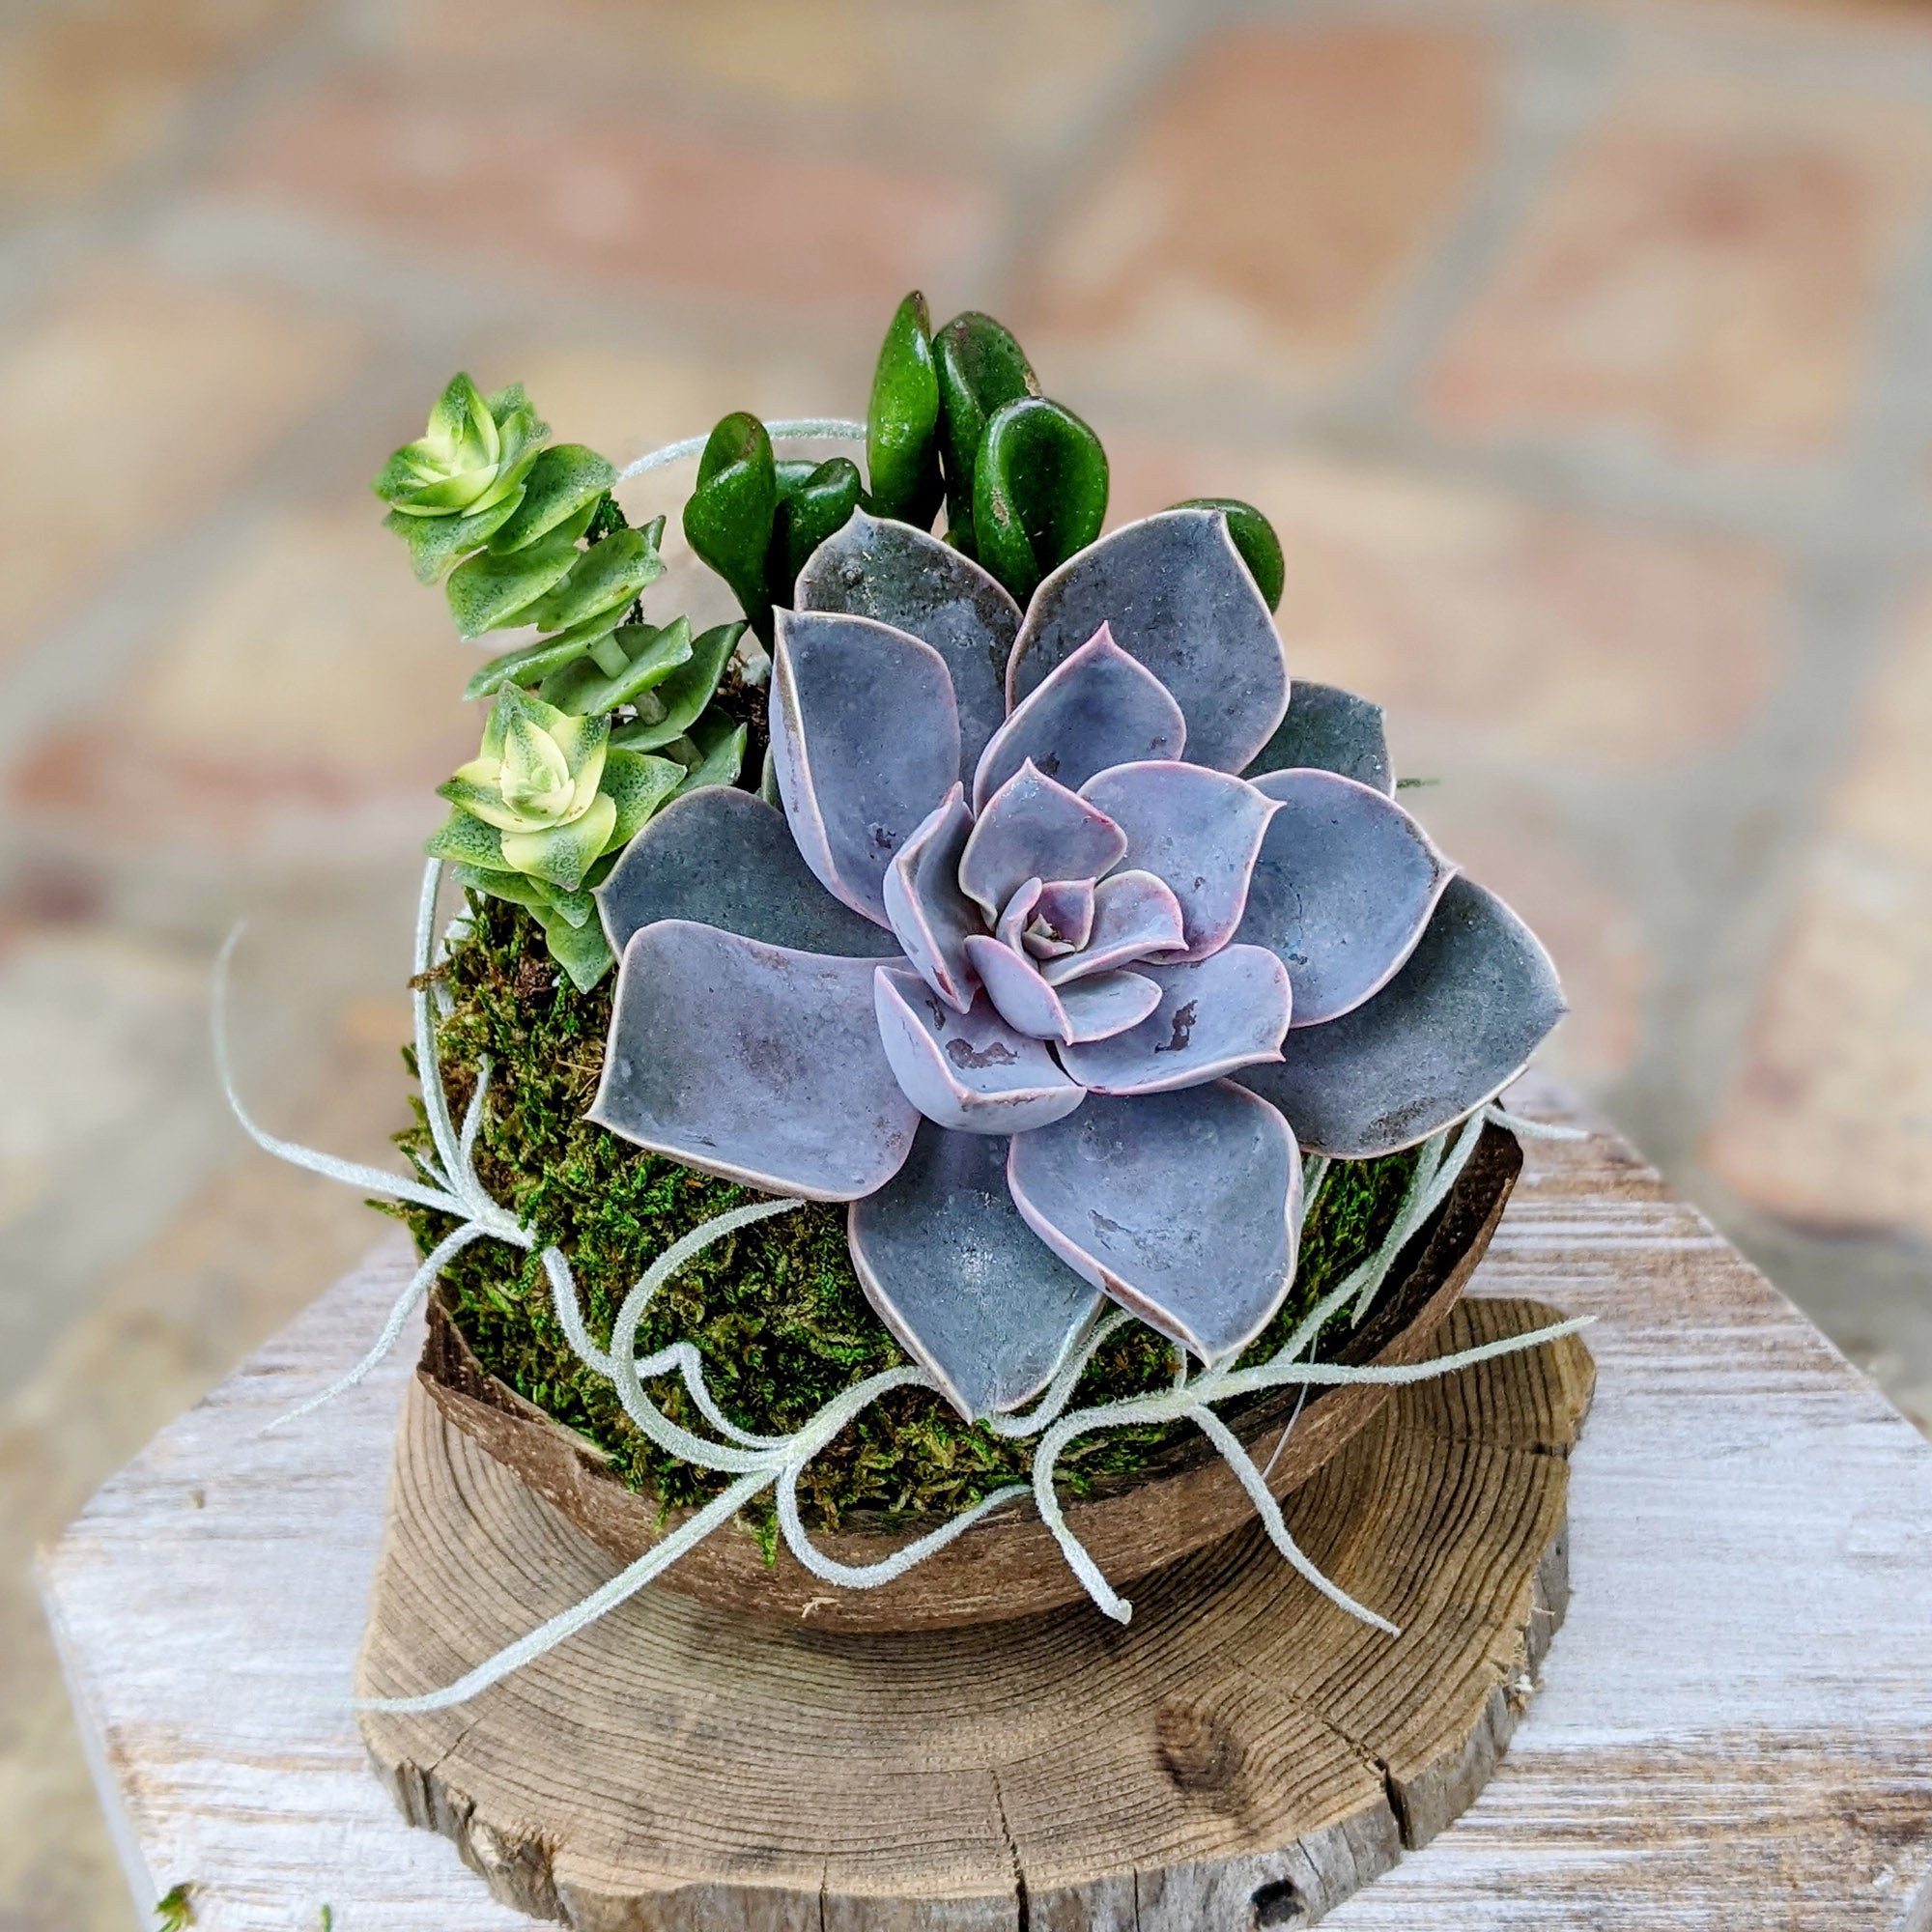 Live Succulent In A Coconut Shell